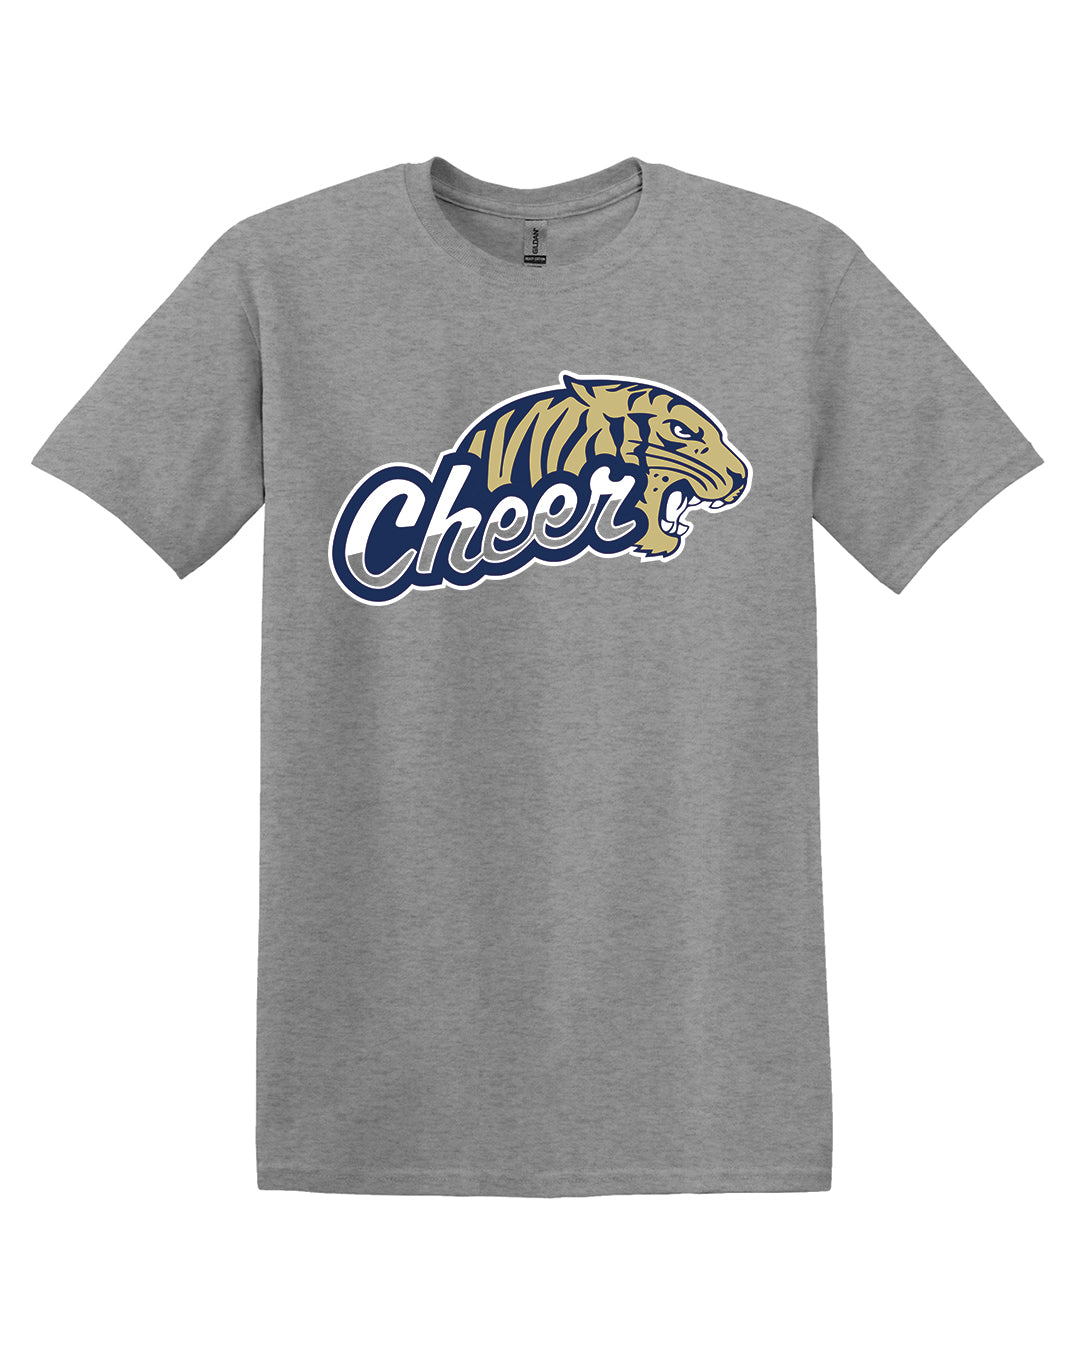 Classic Cohoes Cheer Top